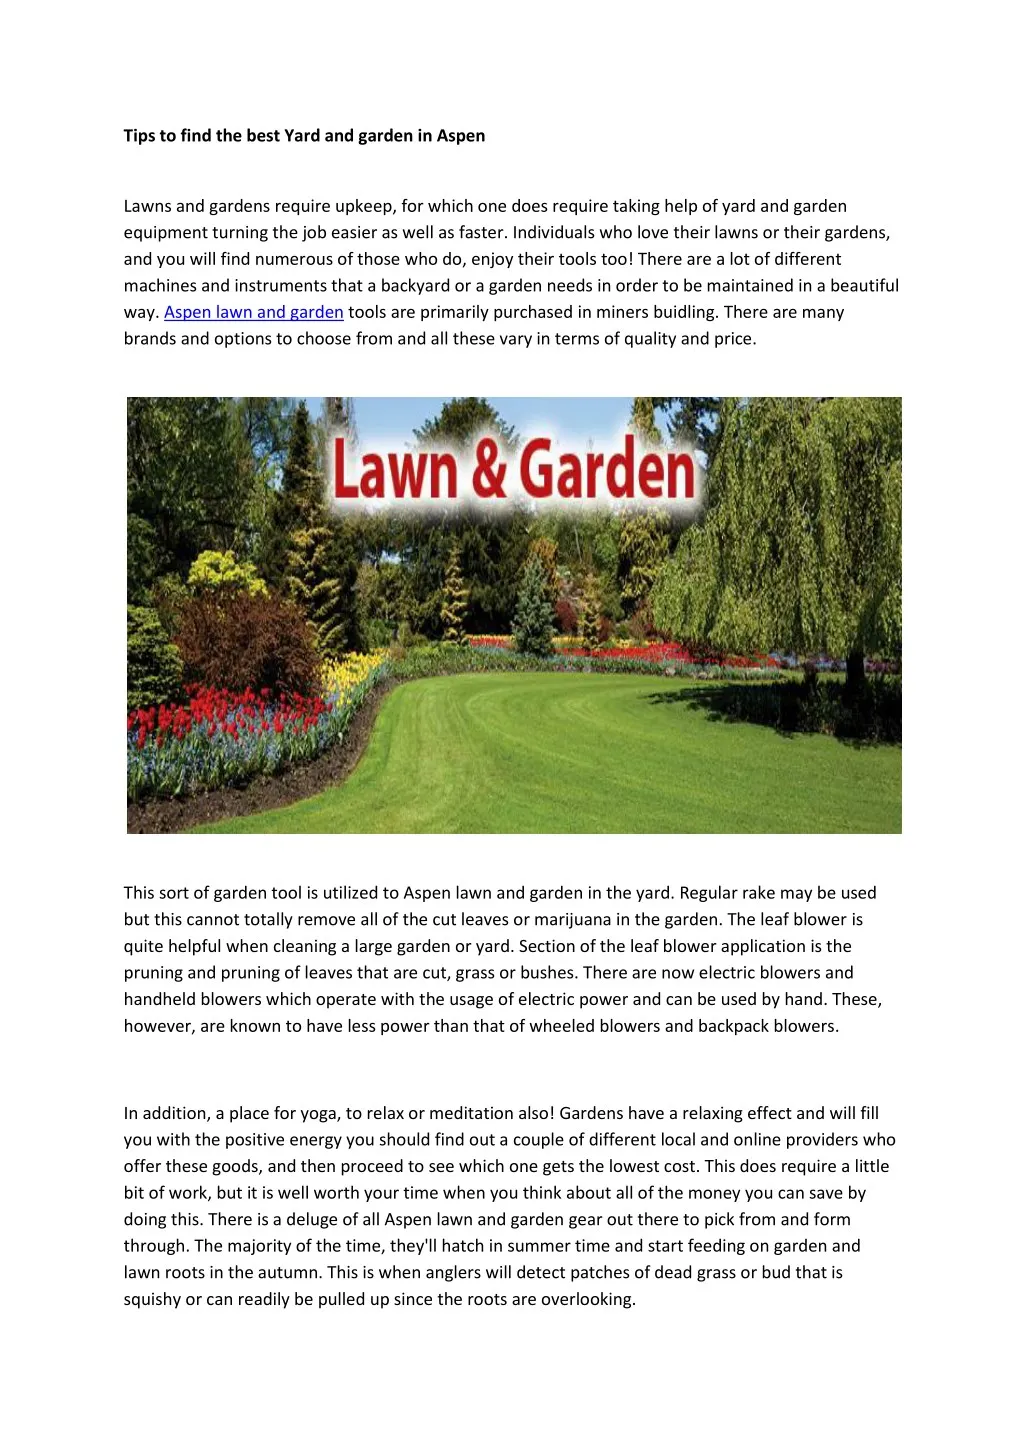 tips to find the best yard and garden in aspen